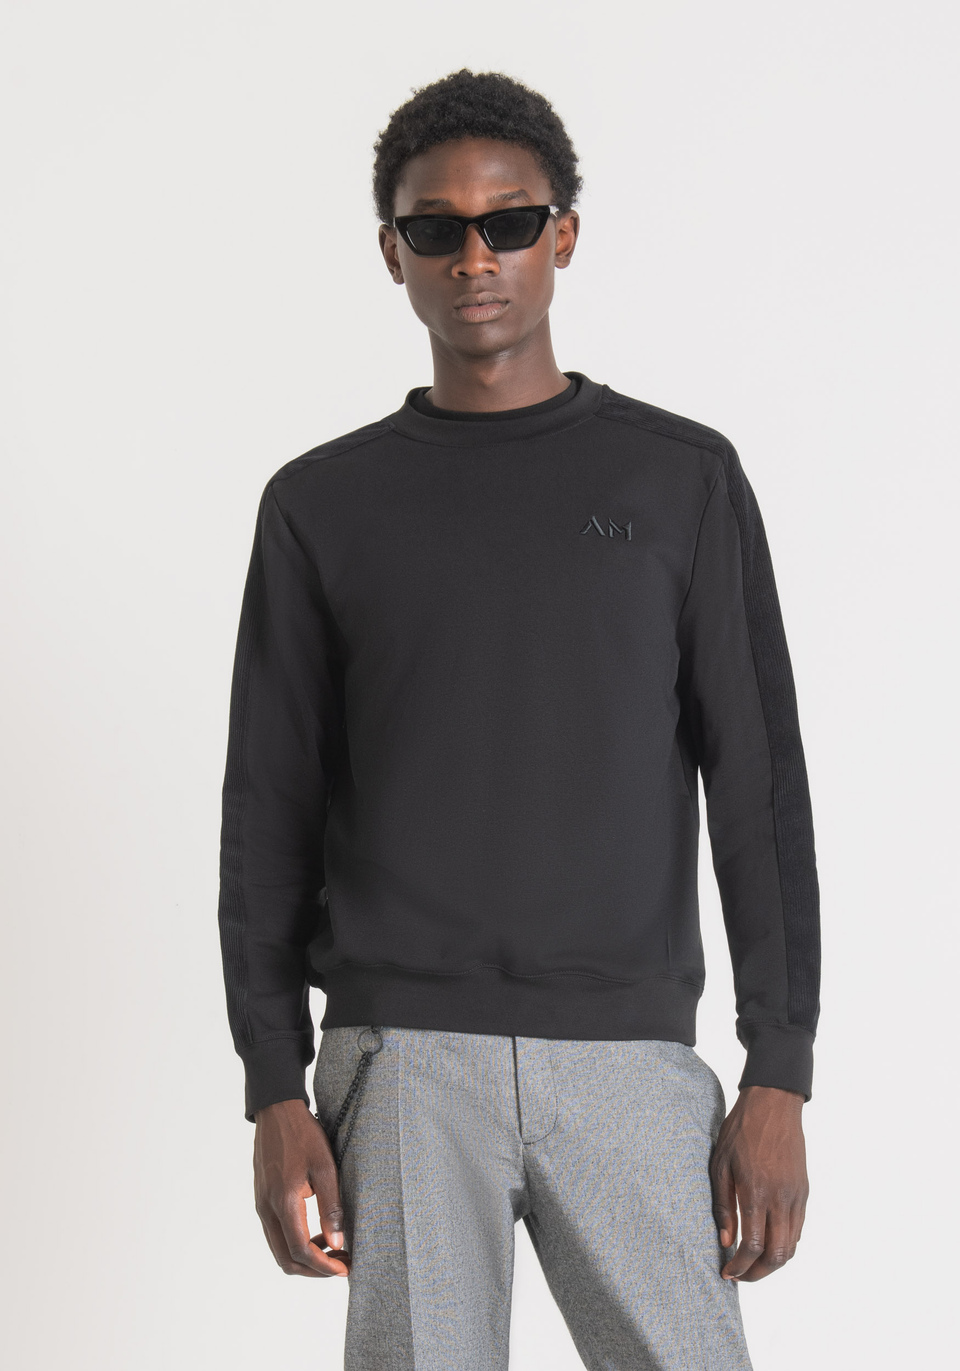 REGULAR FIT SWEATSHIRT IN SOFT COTTON BLEND FABRIC WITH EMBROIDERED LOGO - Antony Morato Online Shop